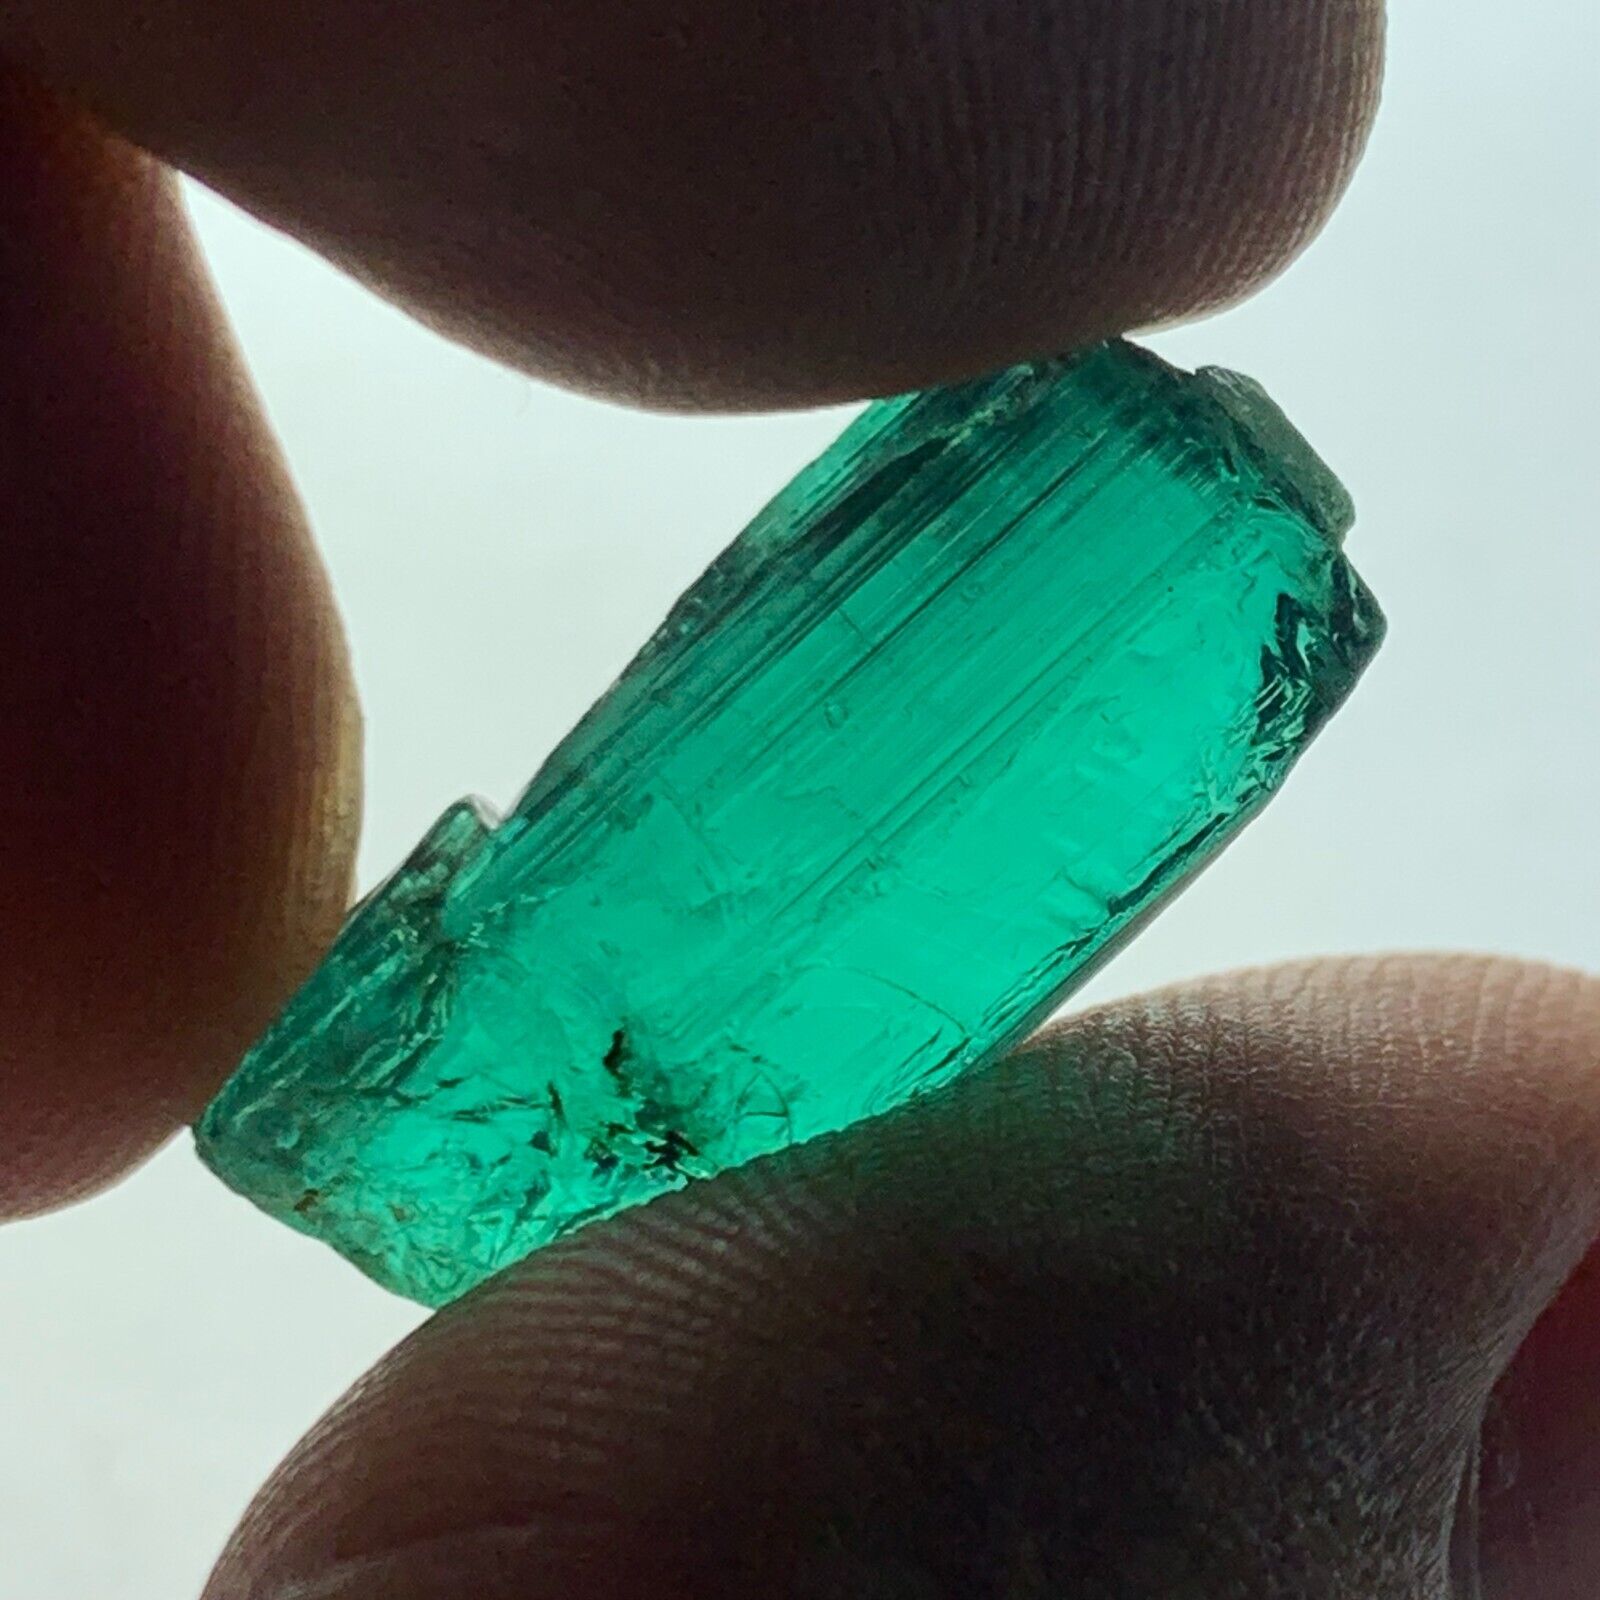 Rough Tourmaline Green Color from Afghanistan, Weight : 14.80 Carats Tourmaline